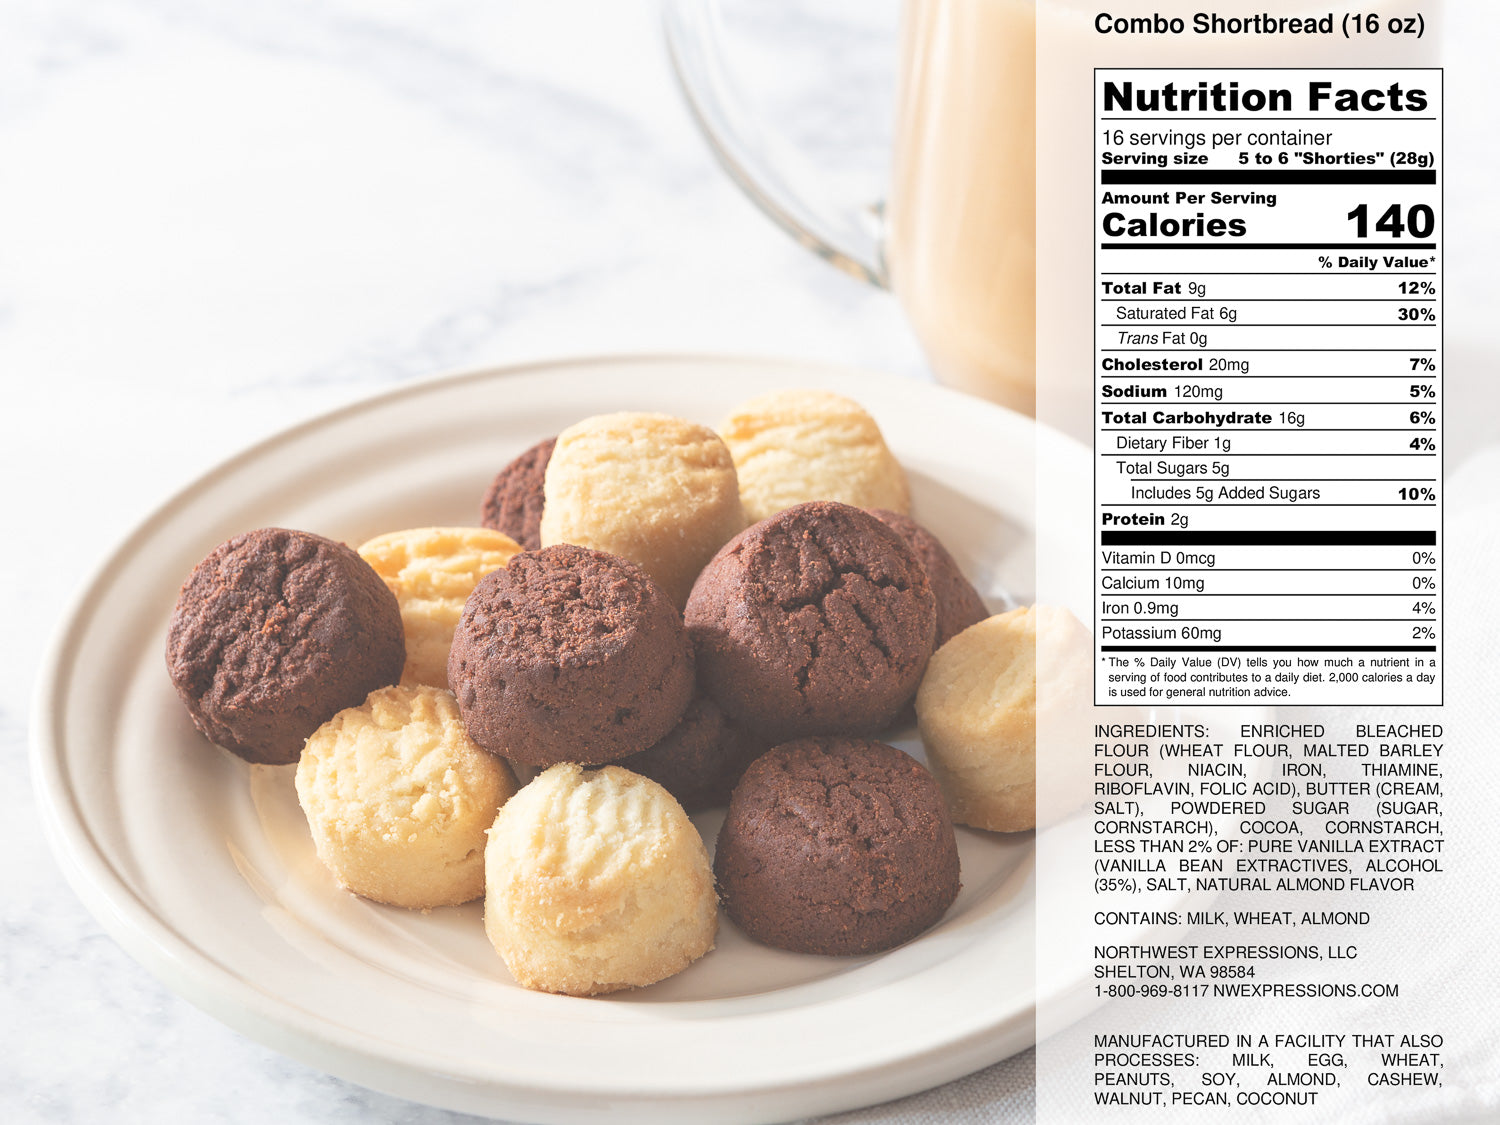 nutrition facts for the combo shortbread box